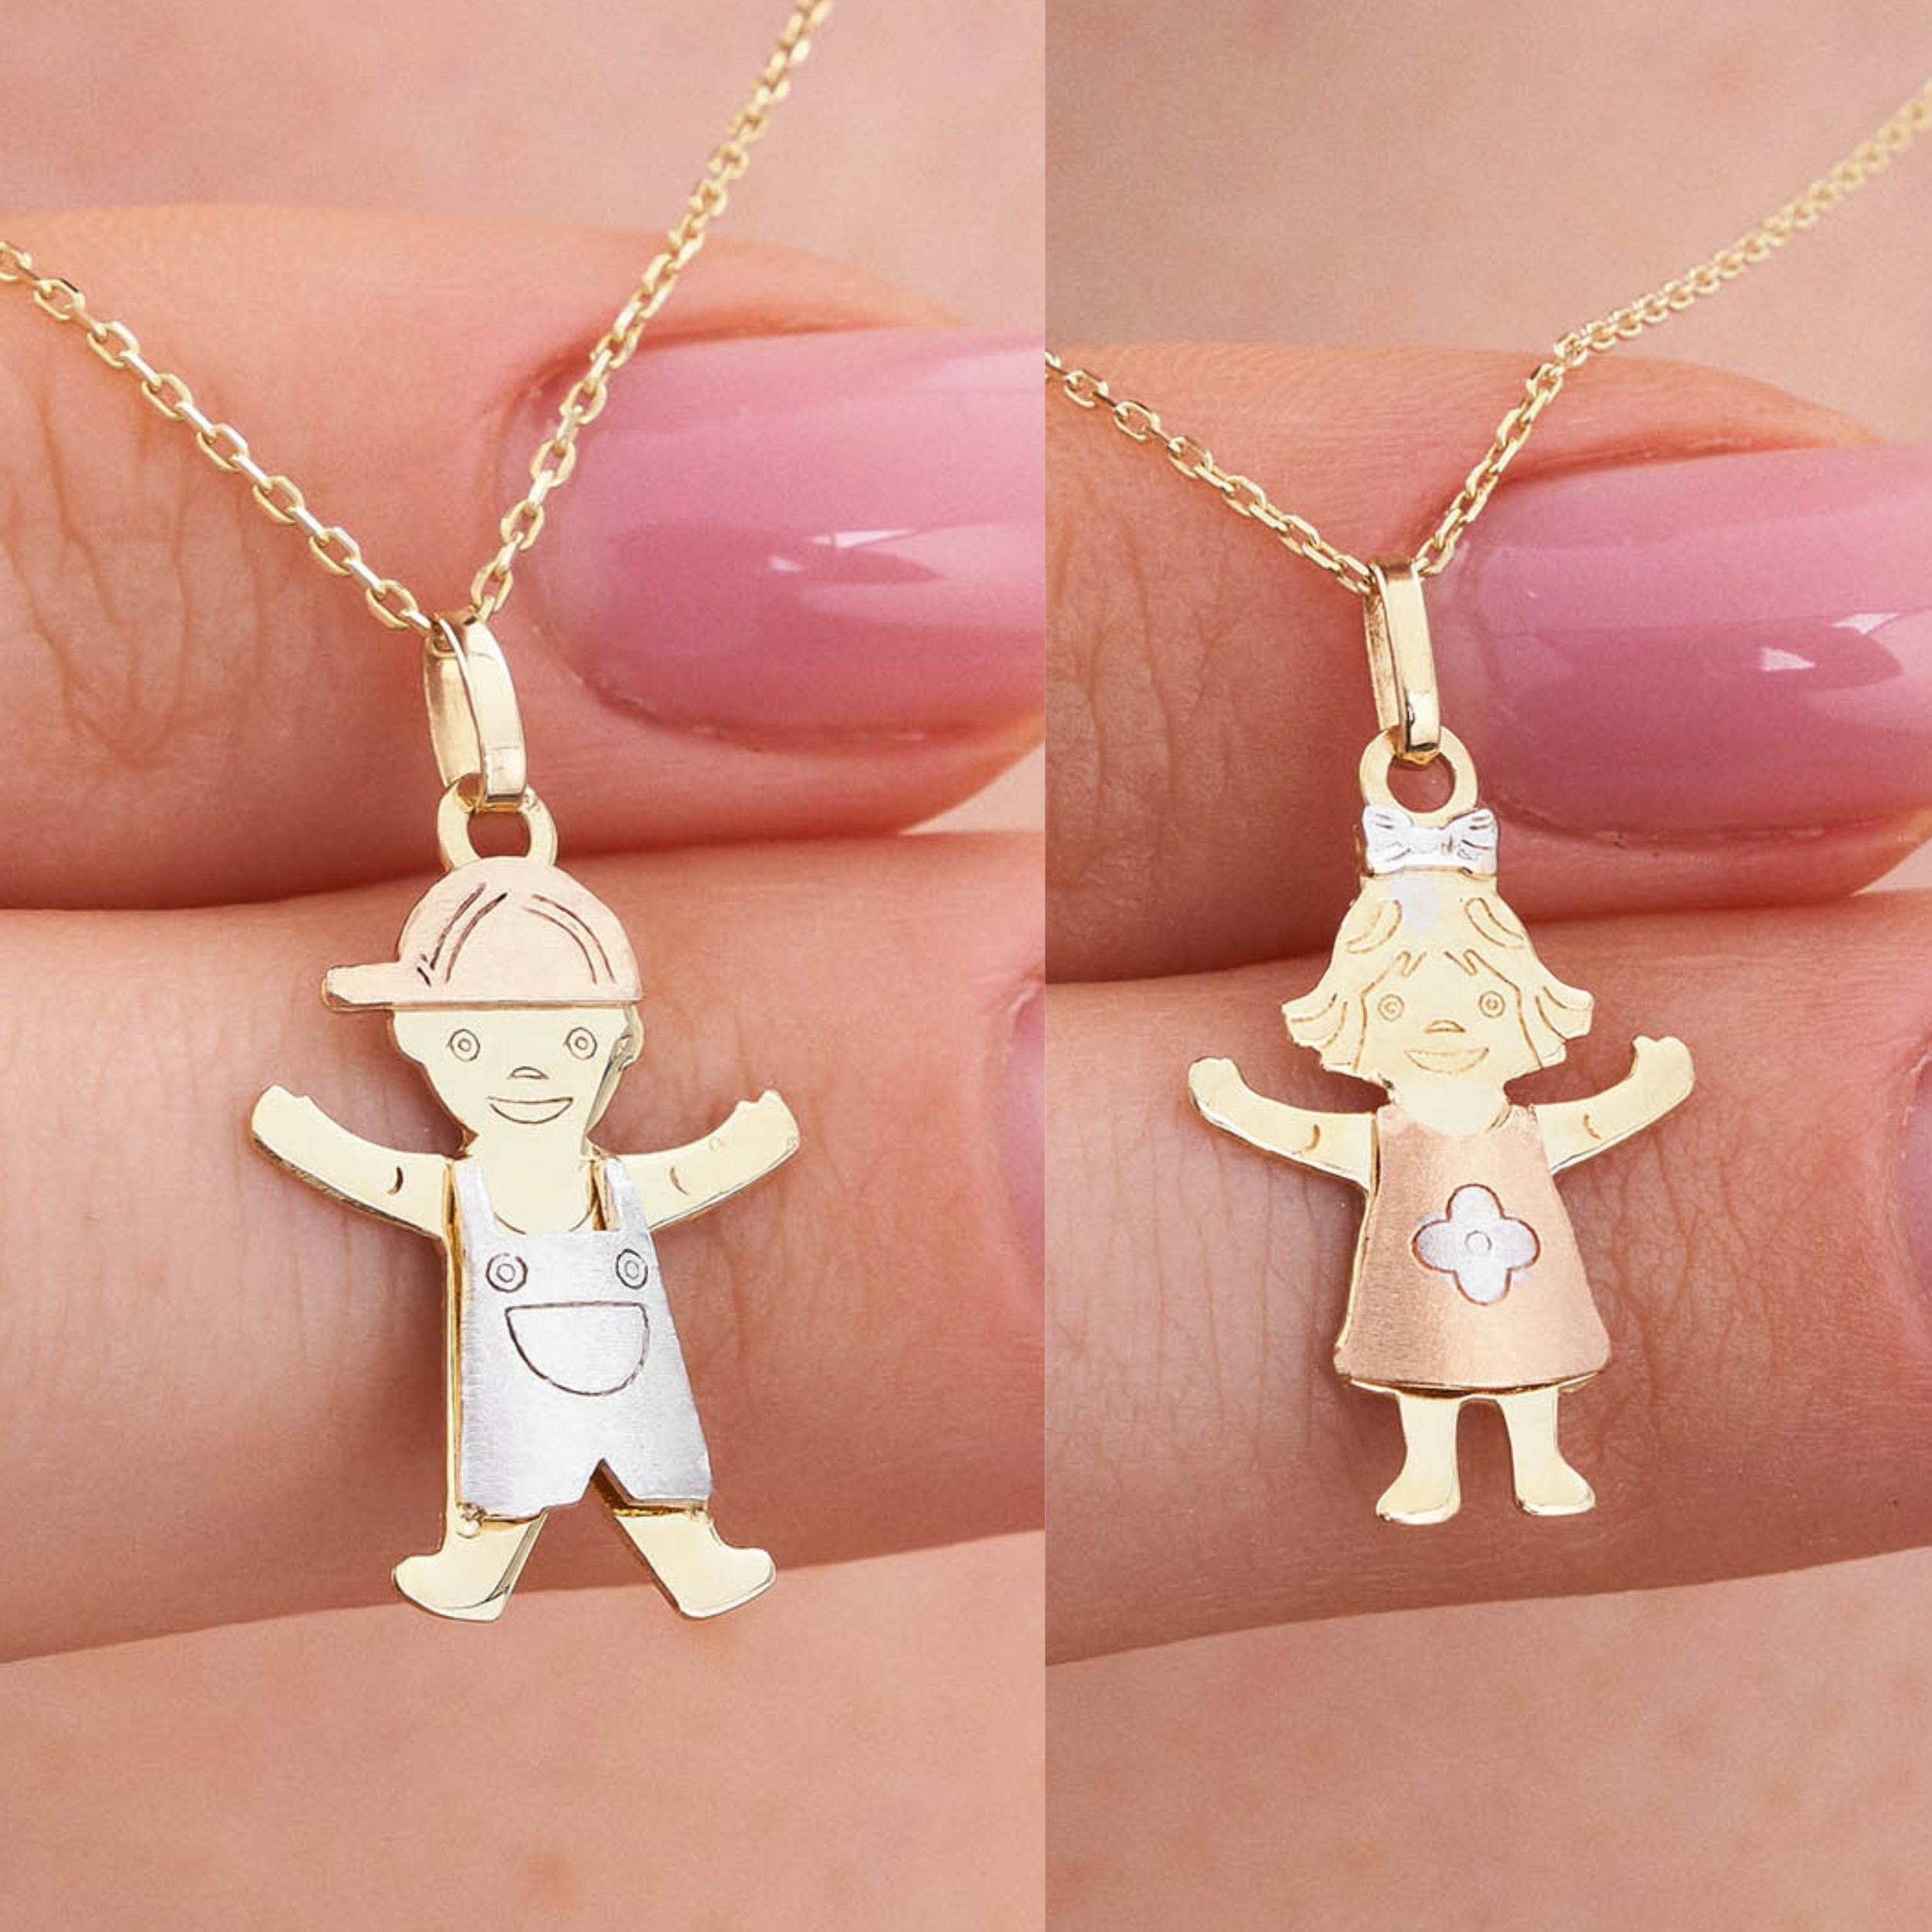 Gold Plated Kids Charms Family Necklace with Chain. Boys and Girls